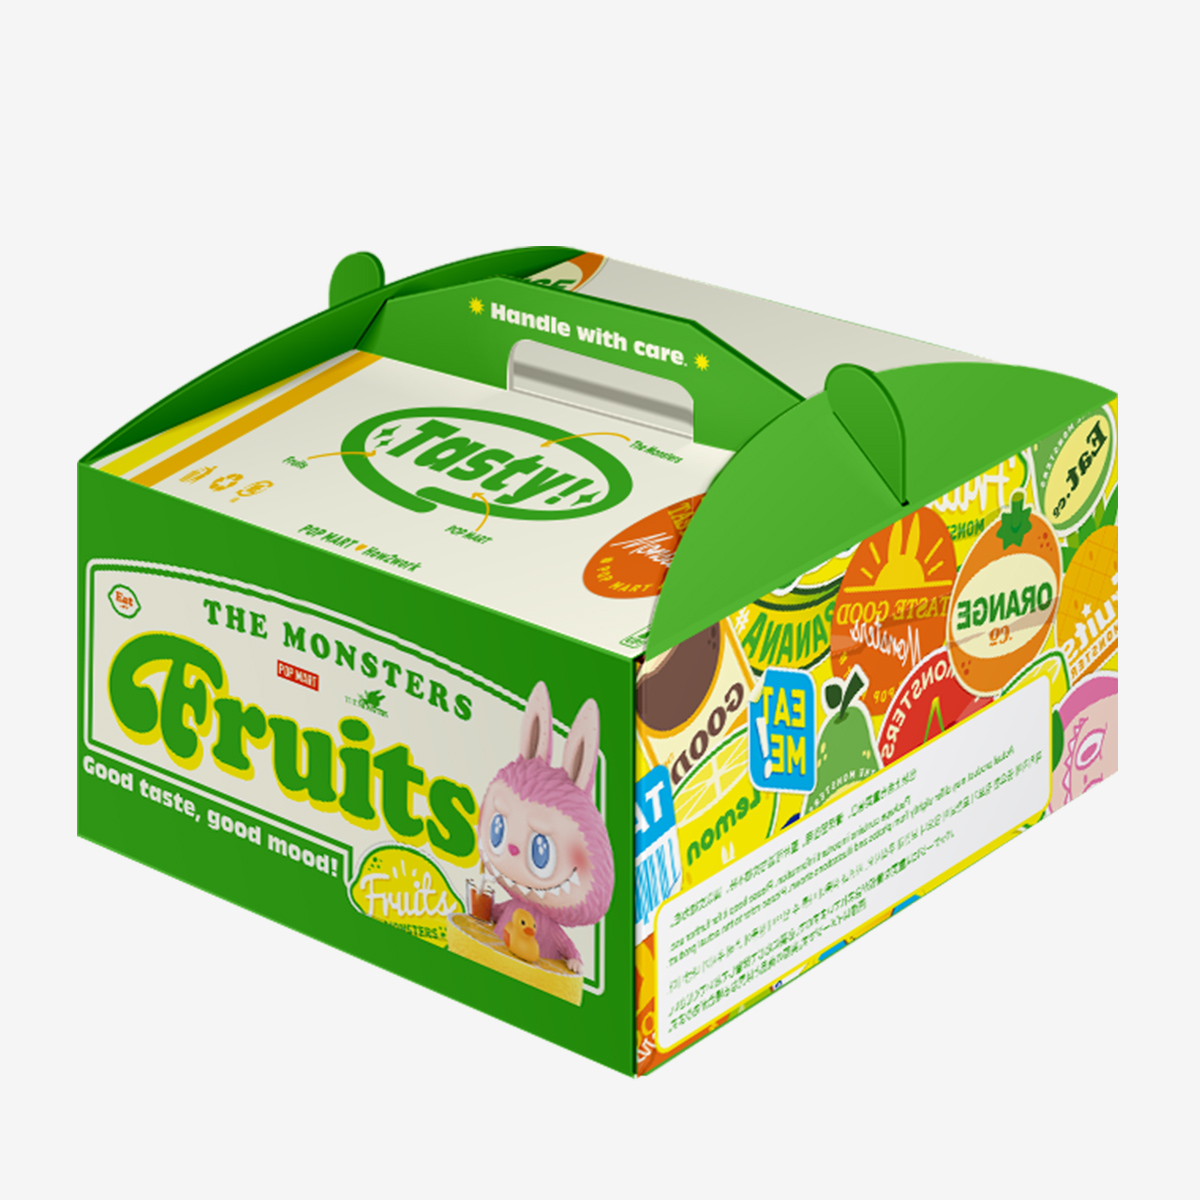 The Monsters Fruits Series - POP MART (Thailand)